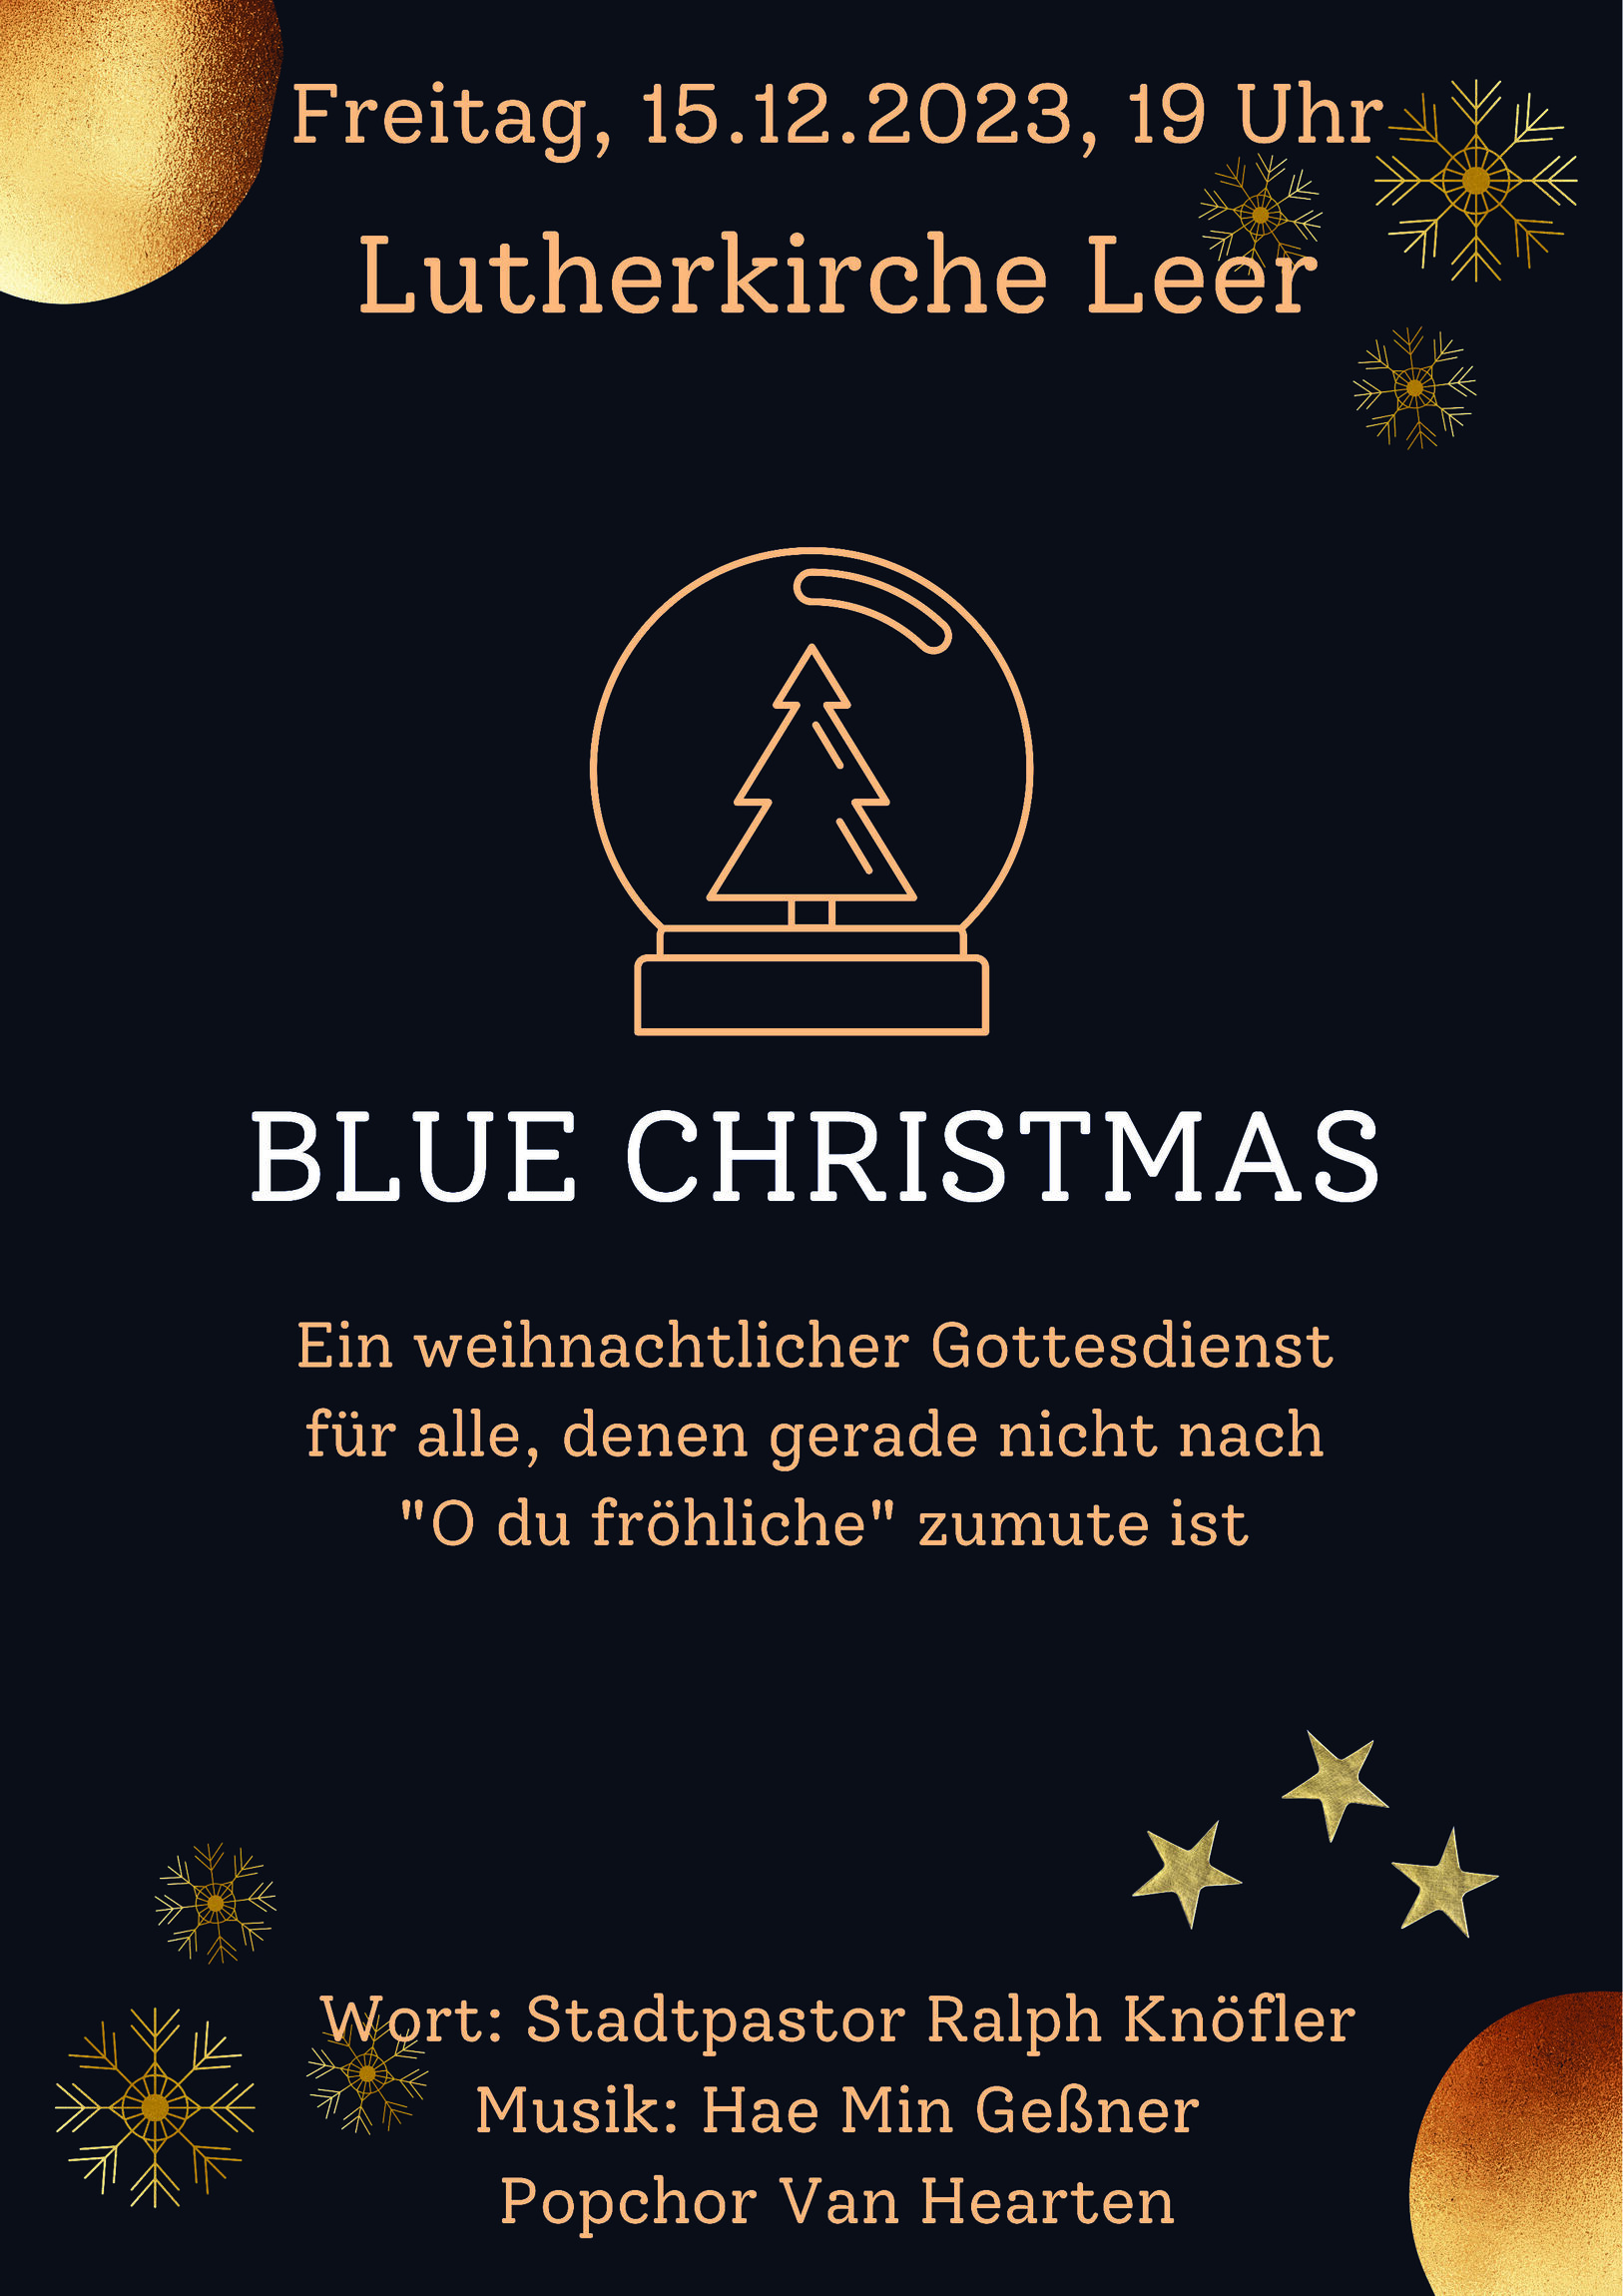 Blue Christmas am 15.12.23 in der Lutherkirche